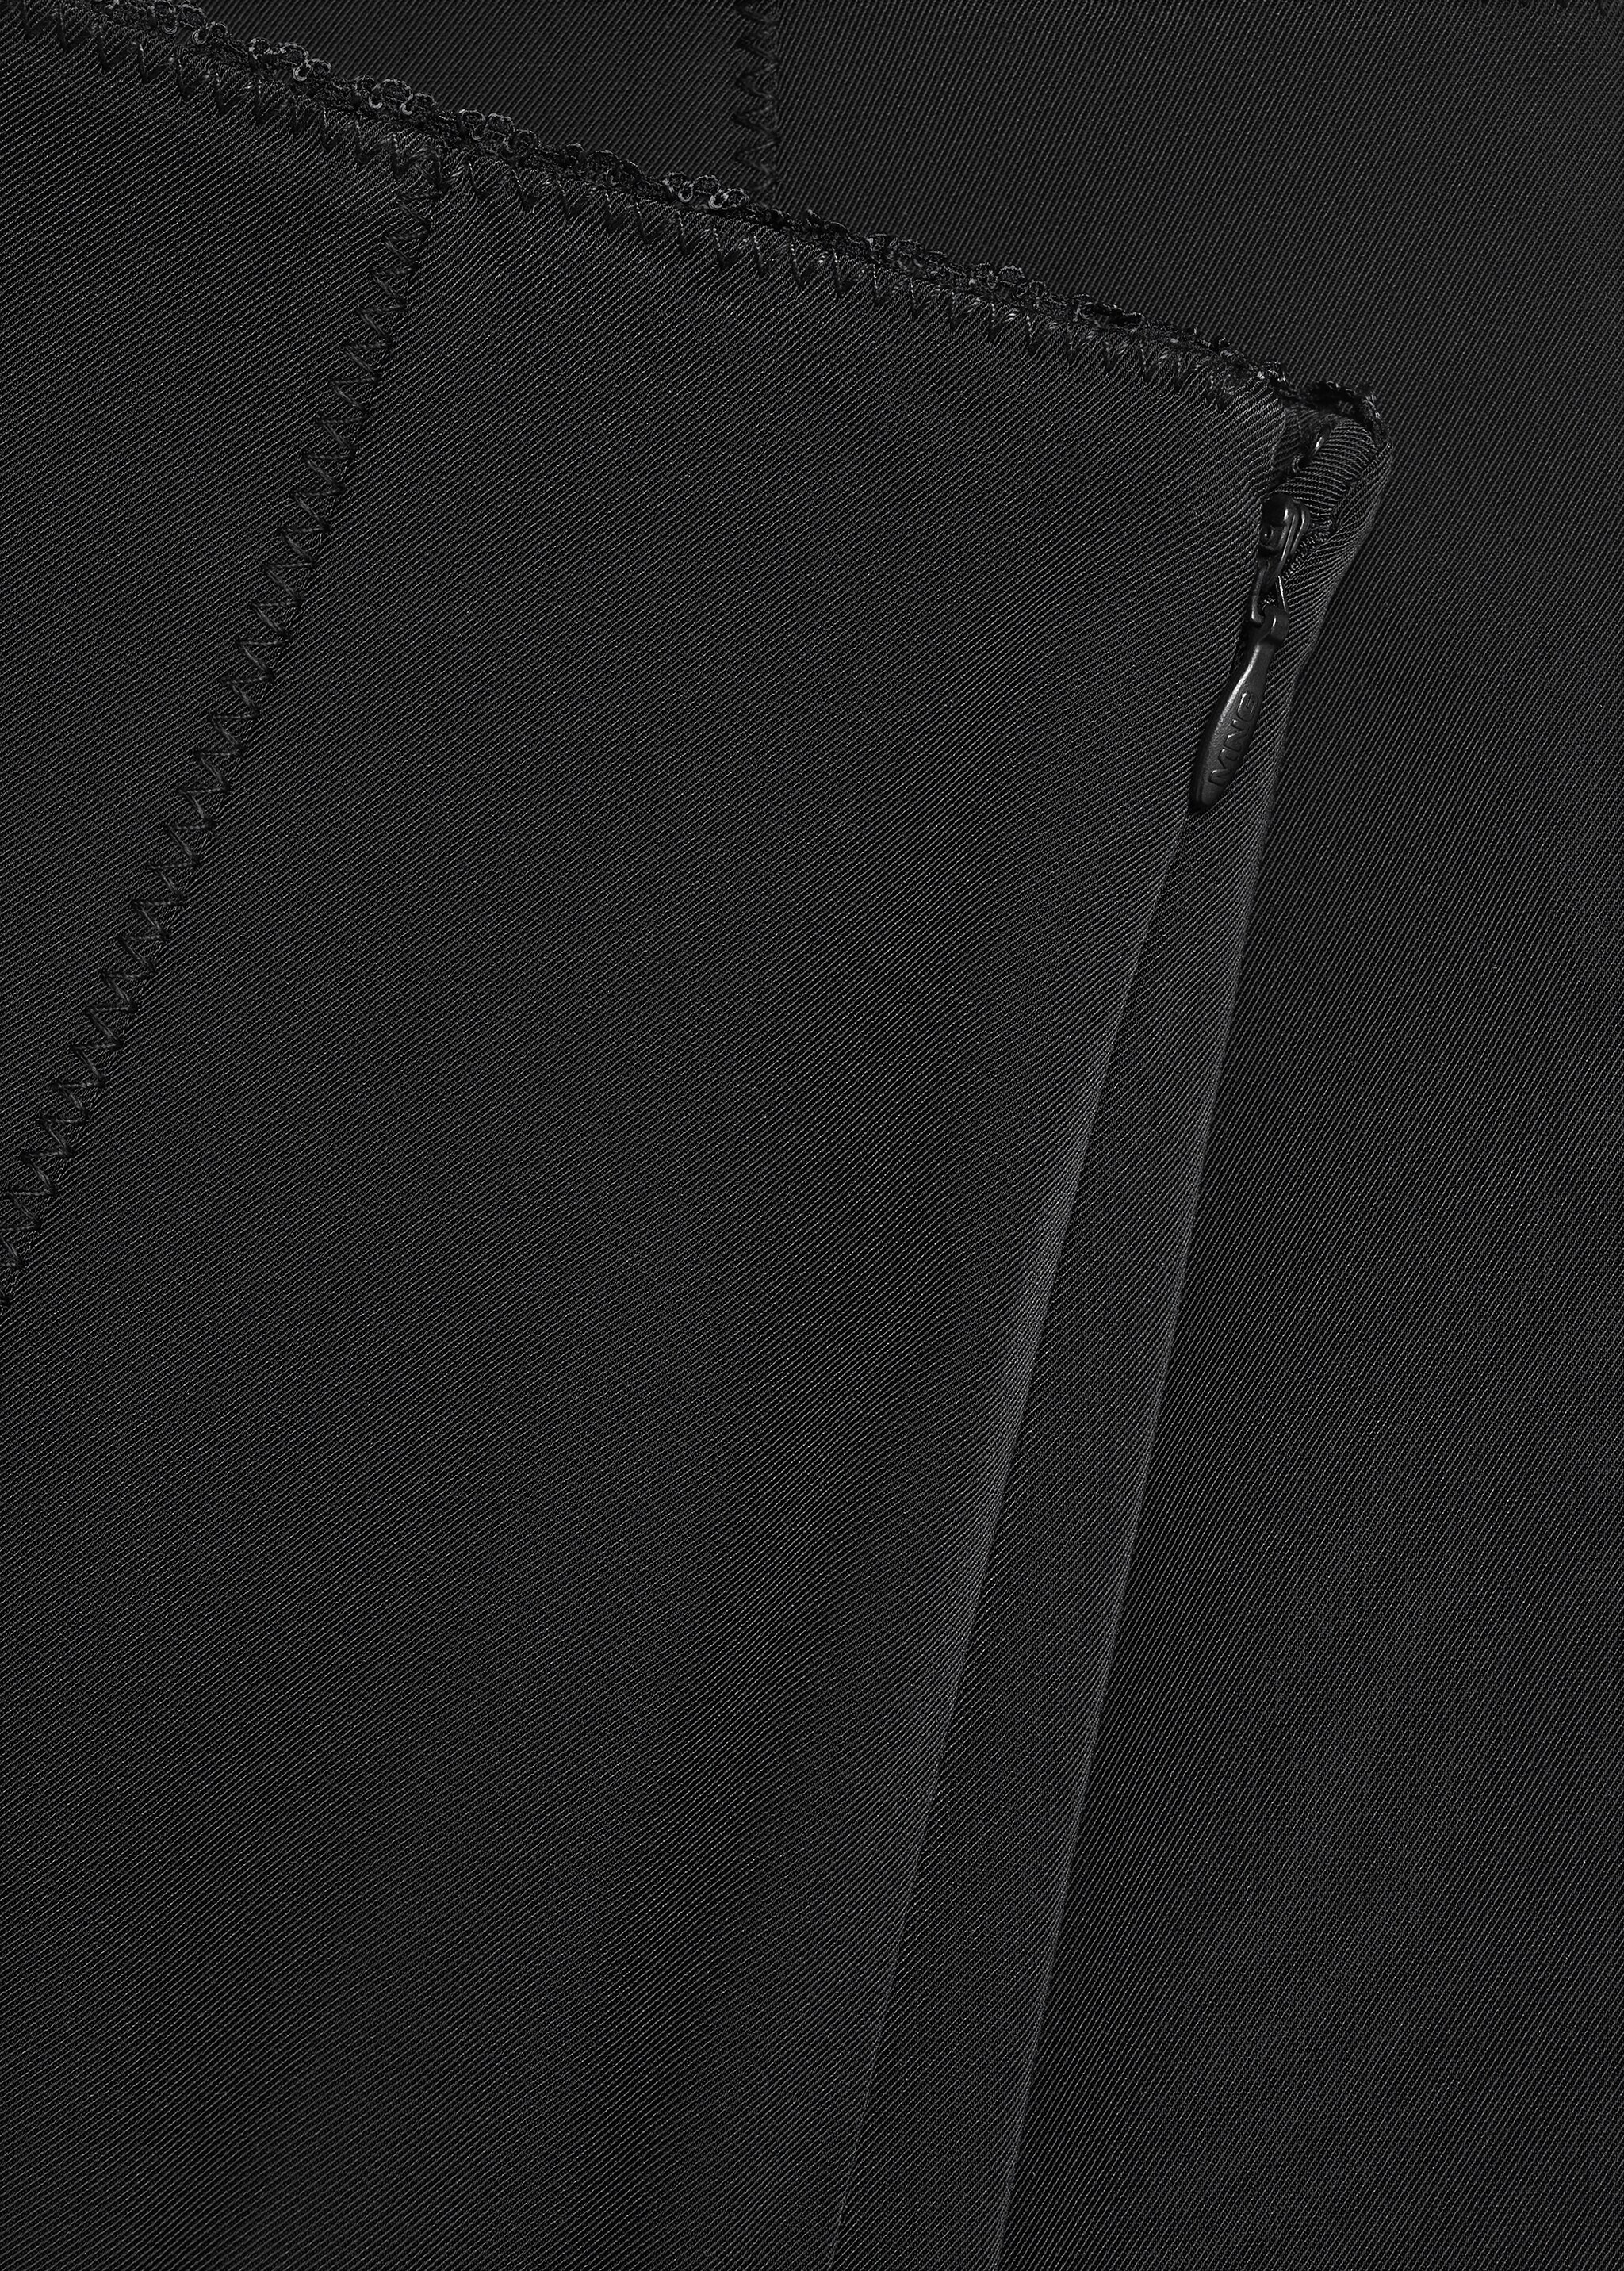 Decorative stitching shorts - Details of the article 8